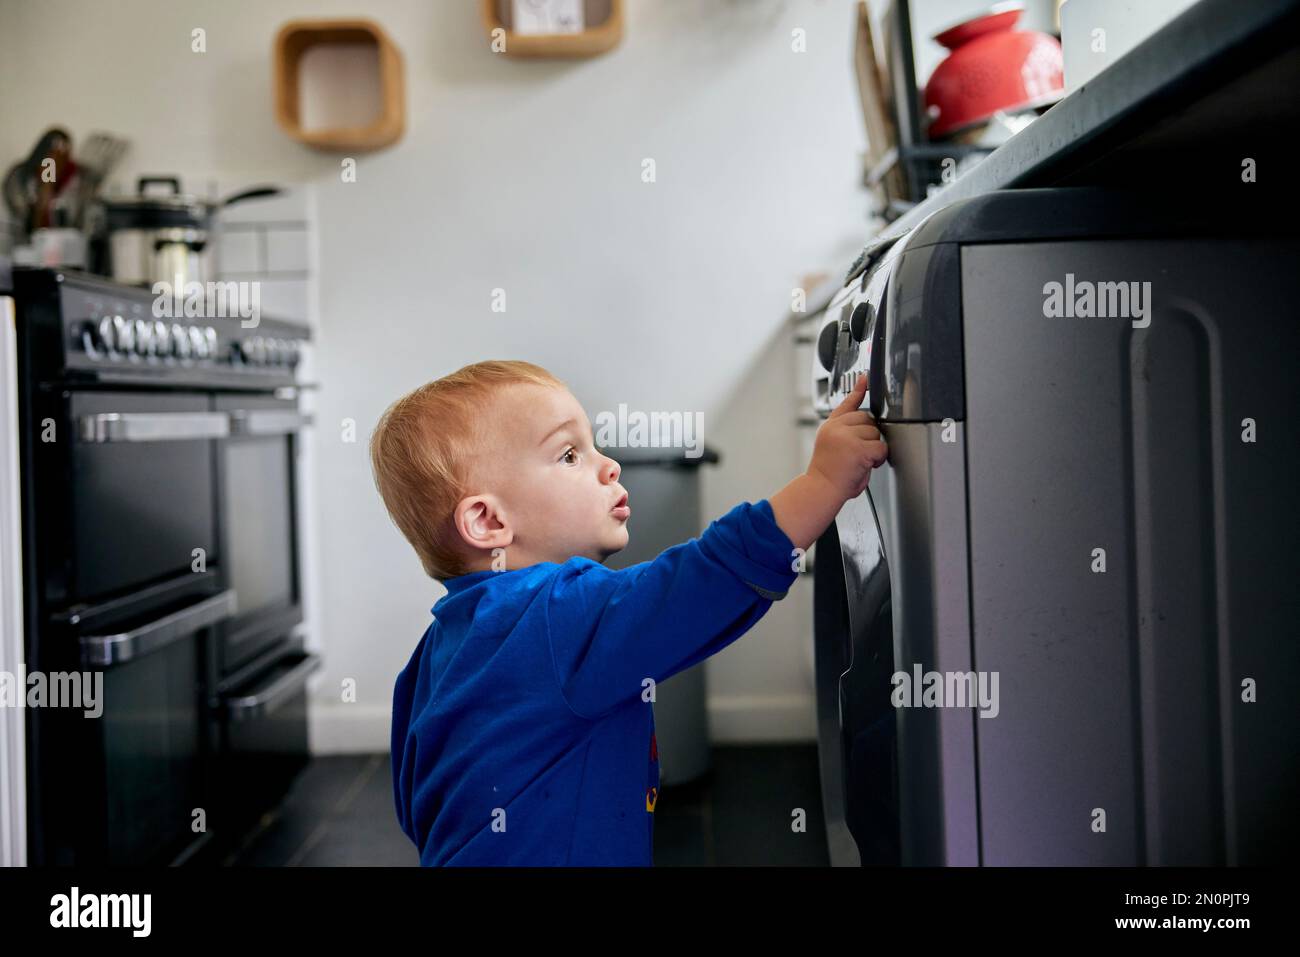 Toddler reaching up and touching appliance in kitchen Stock Photo